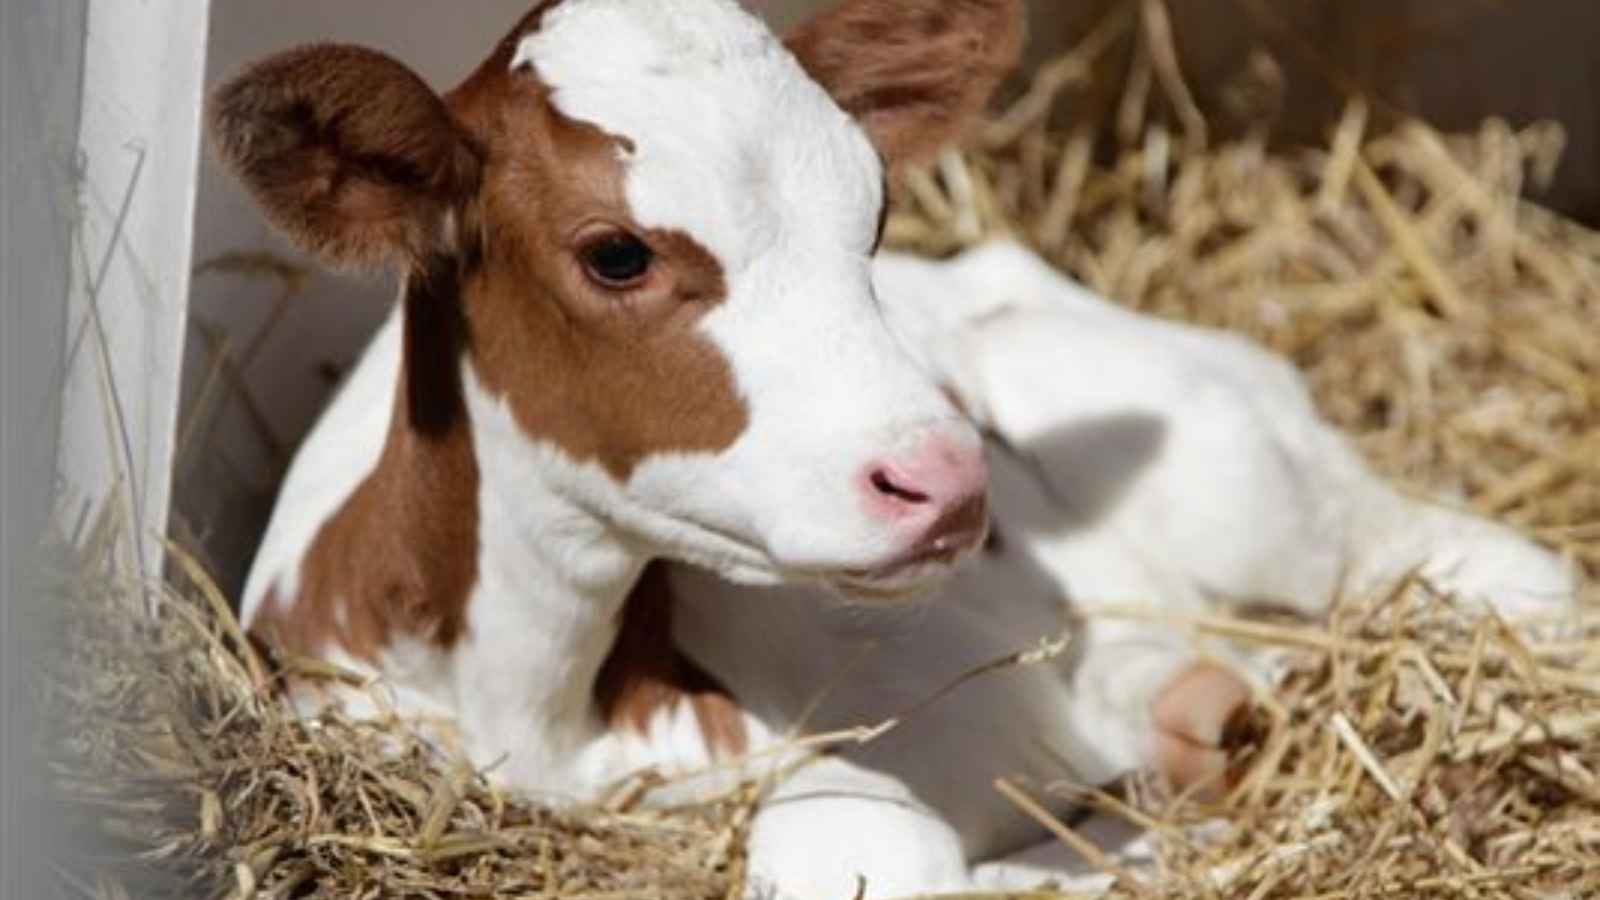 National Veal Ban Action Day 2023: Date, History, Things about Factory Farms